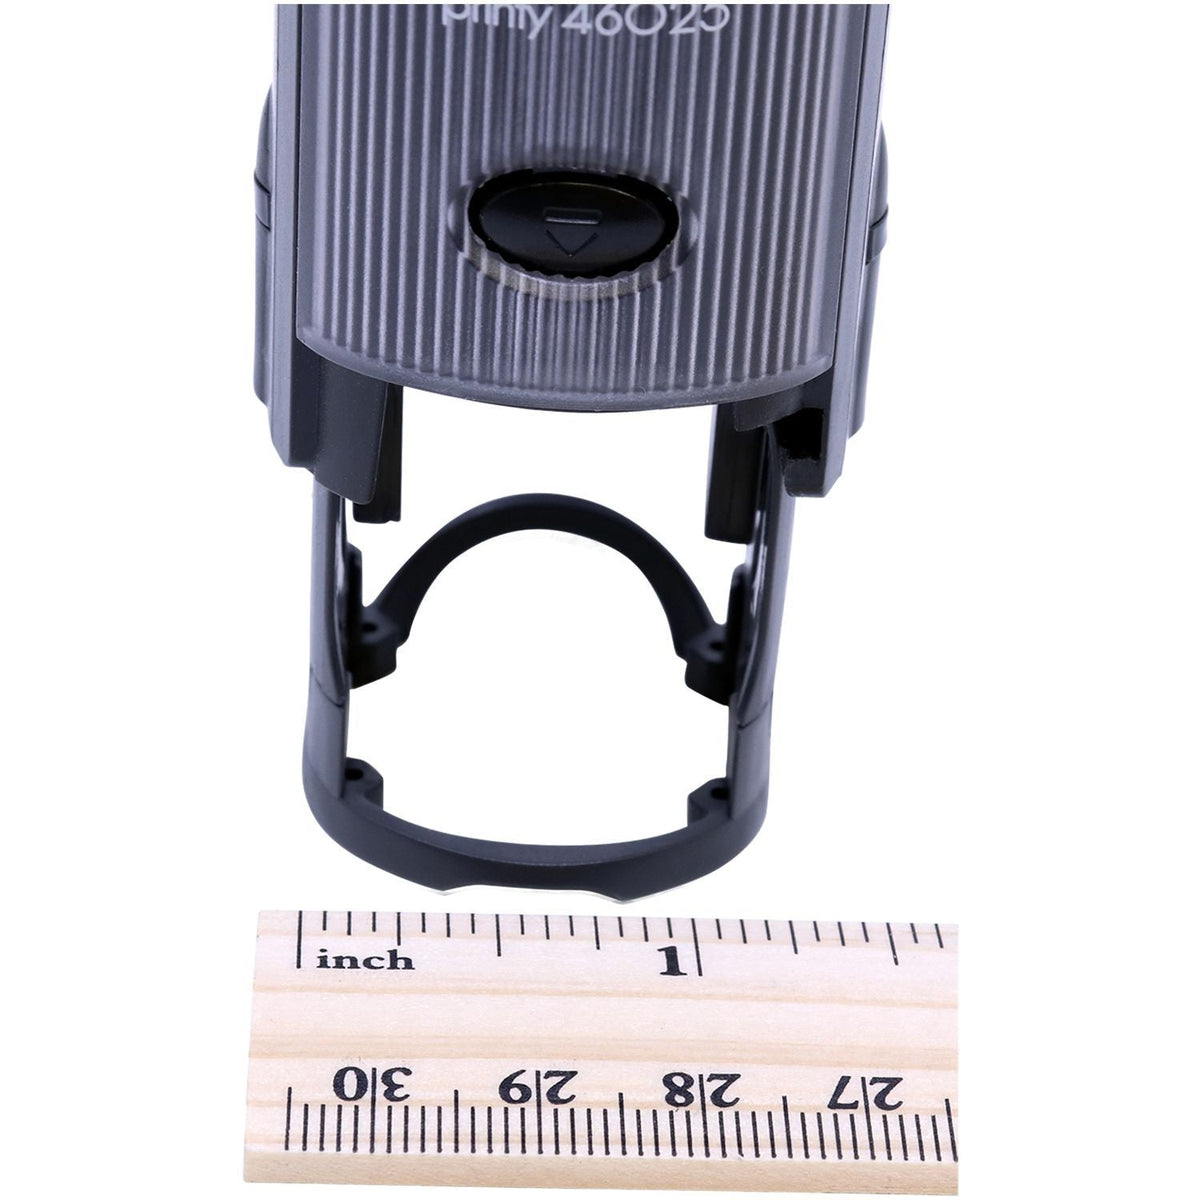 Measurment of Self-Inking Round Draft Stamp with Ruler